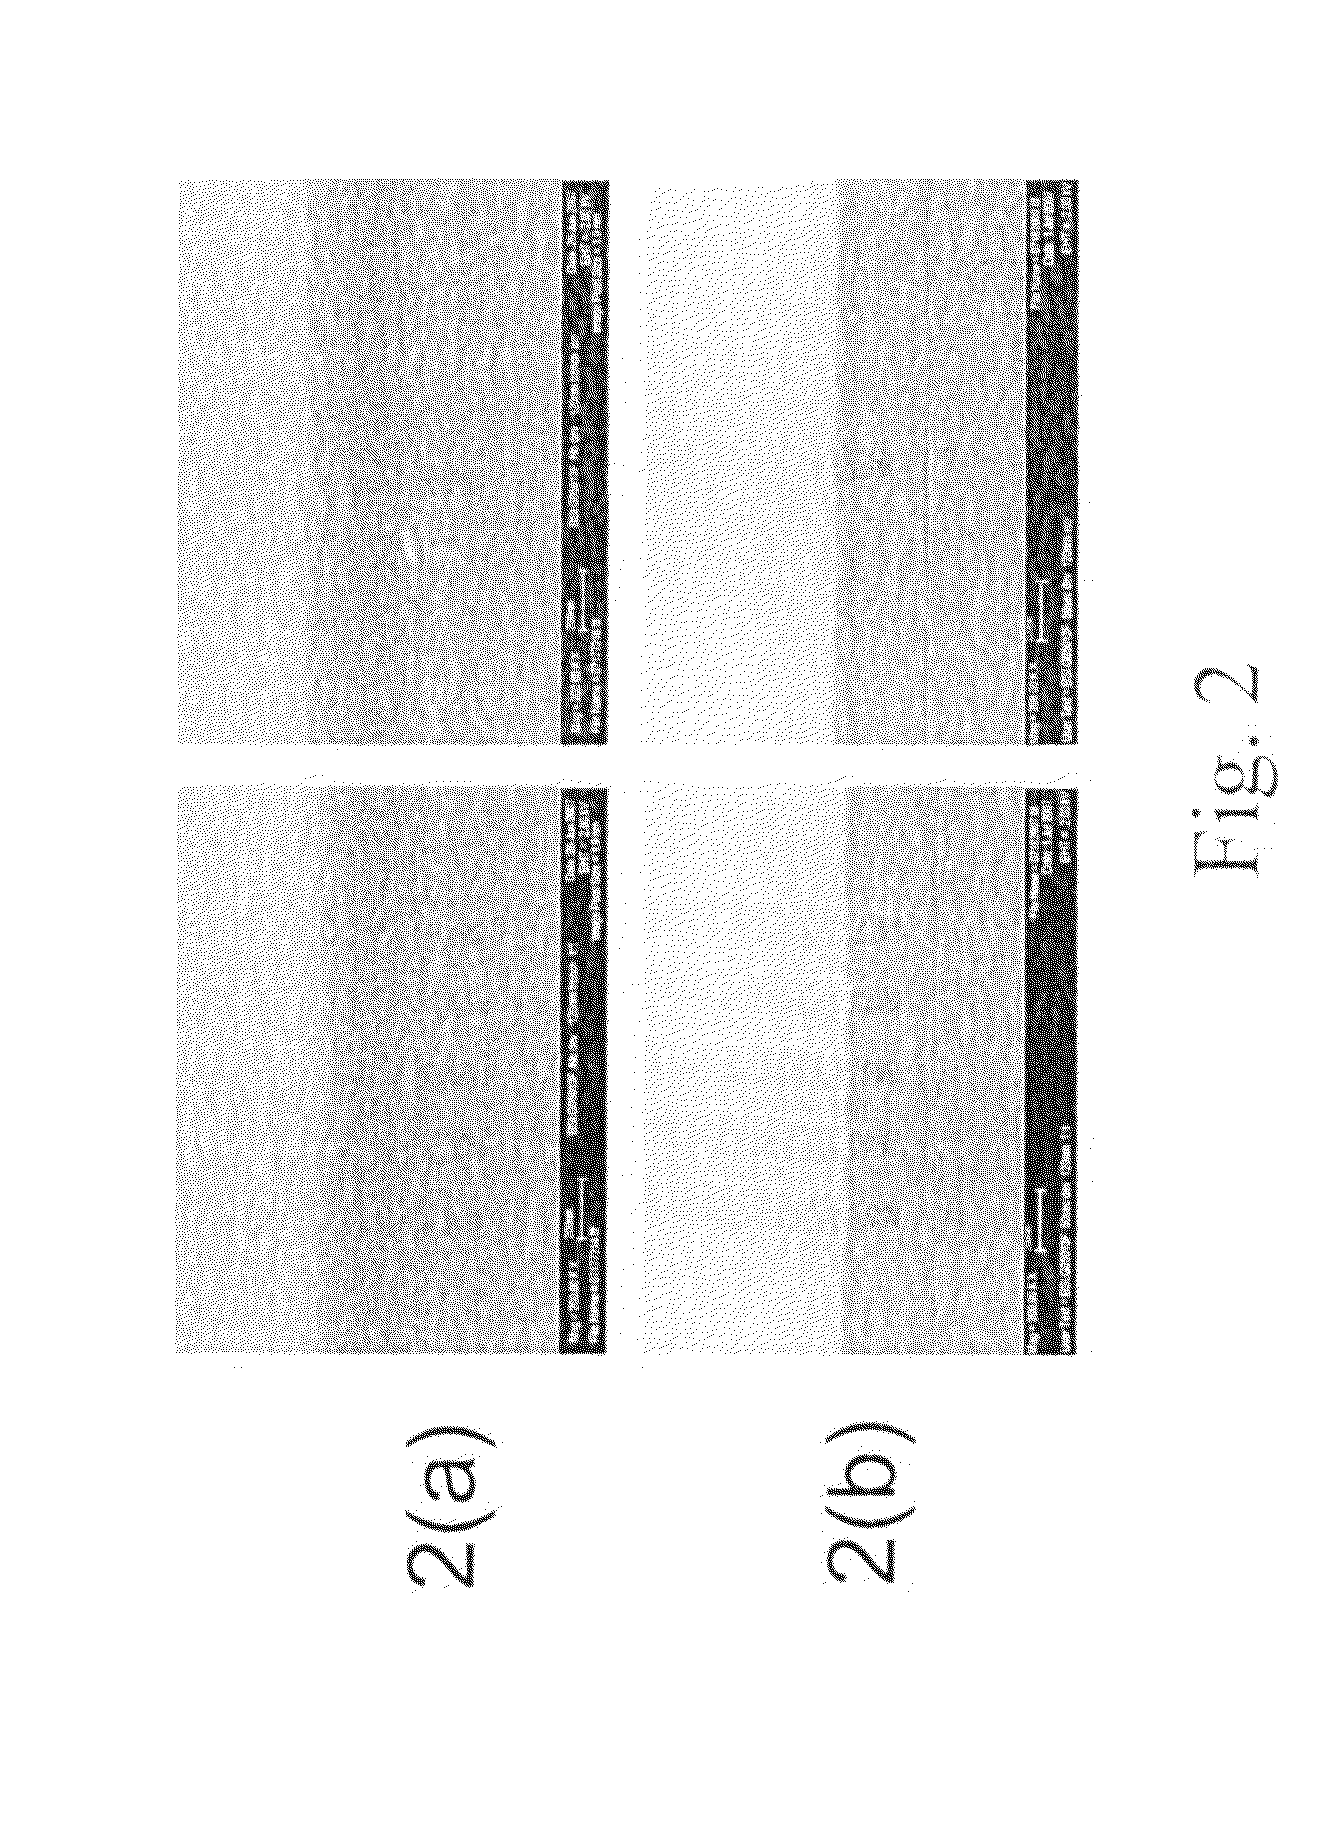 Non-covalently crosslinkable materials for photolithography processes